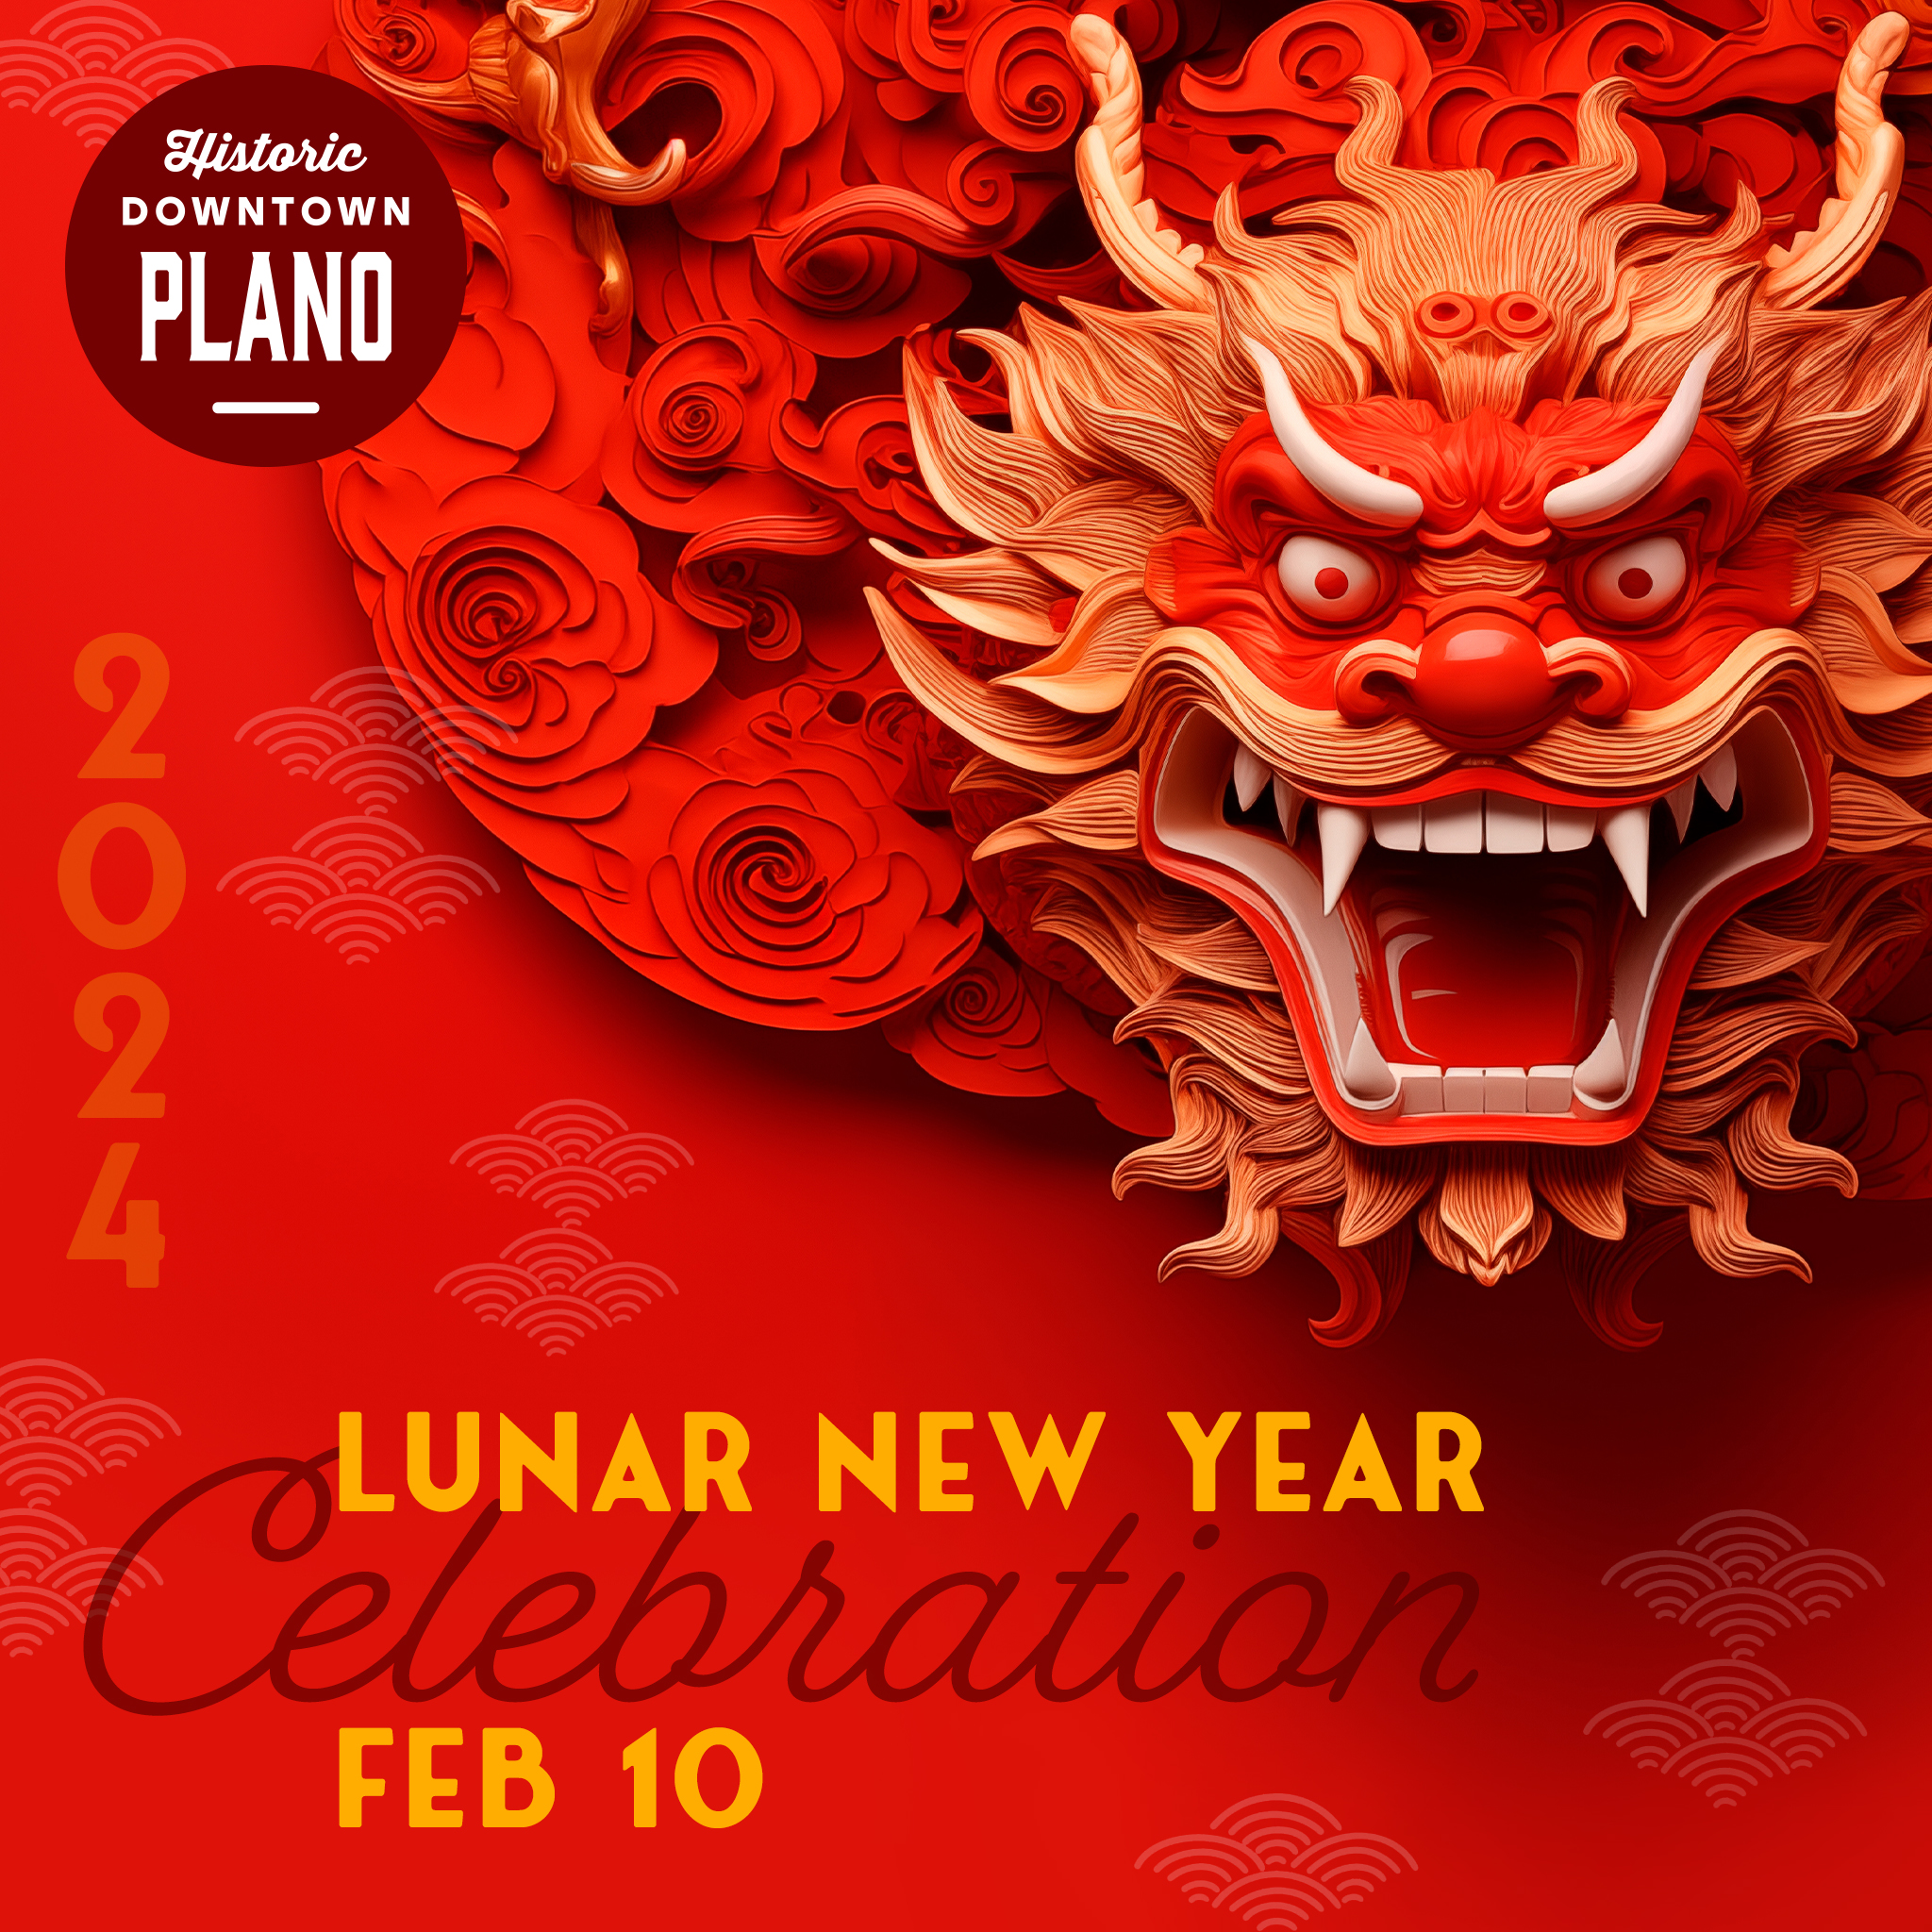 Lunar New Year Celebration in Downtown Plano